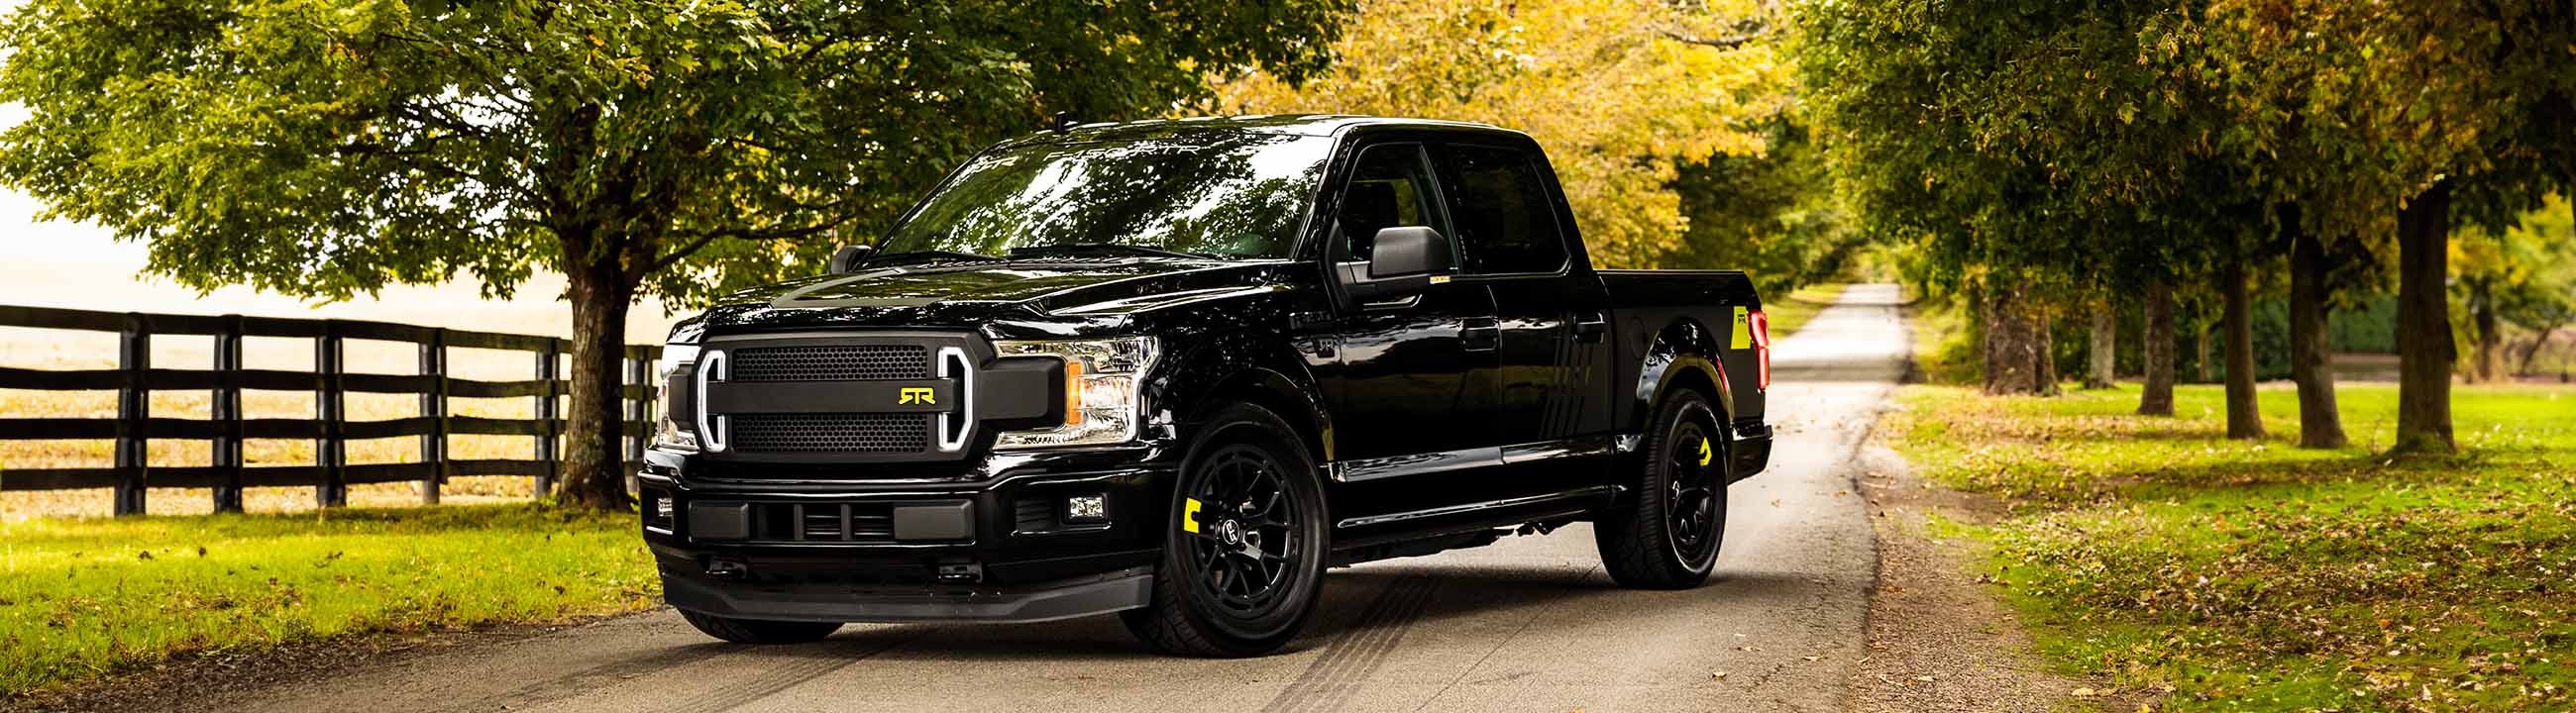 A black Ford F-150 RTR parked on a road, showcasing RTR parts and accessories for Ford F-150s